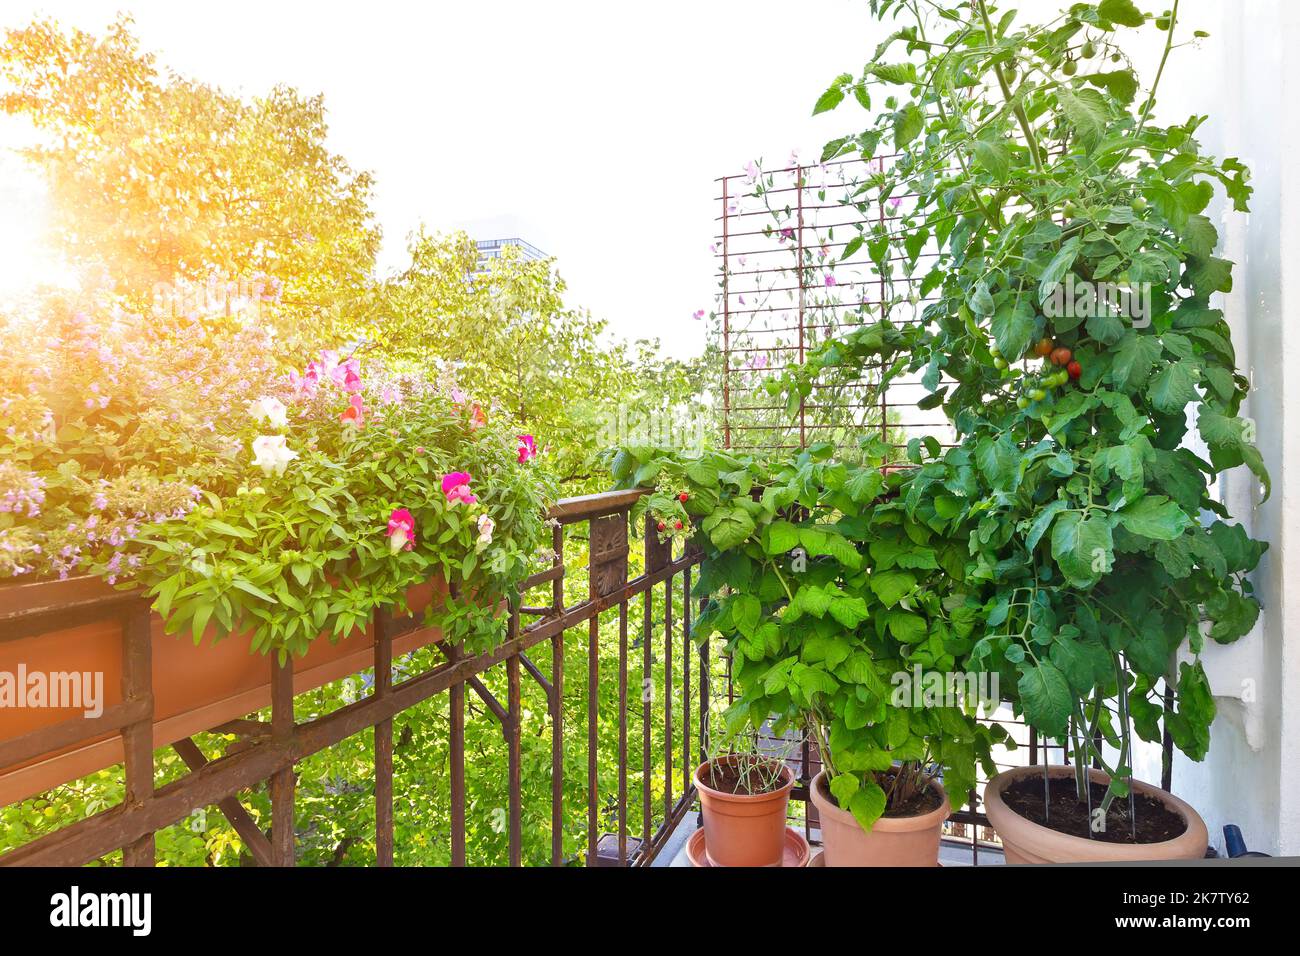 Step by step instruction for inexpensively growing tomatoes from seeds: 11. place on a warm and sunny balcony or patio during summer. Stock Photo